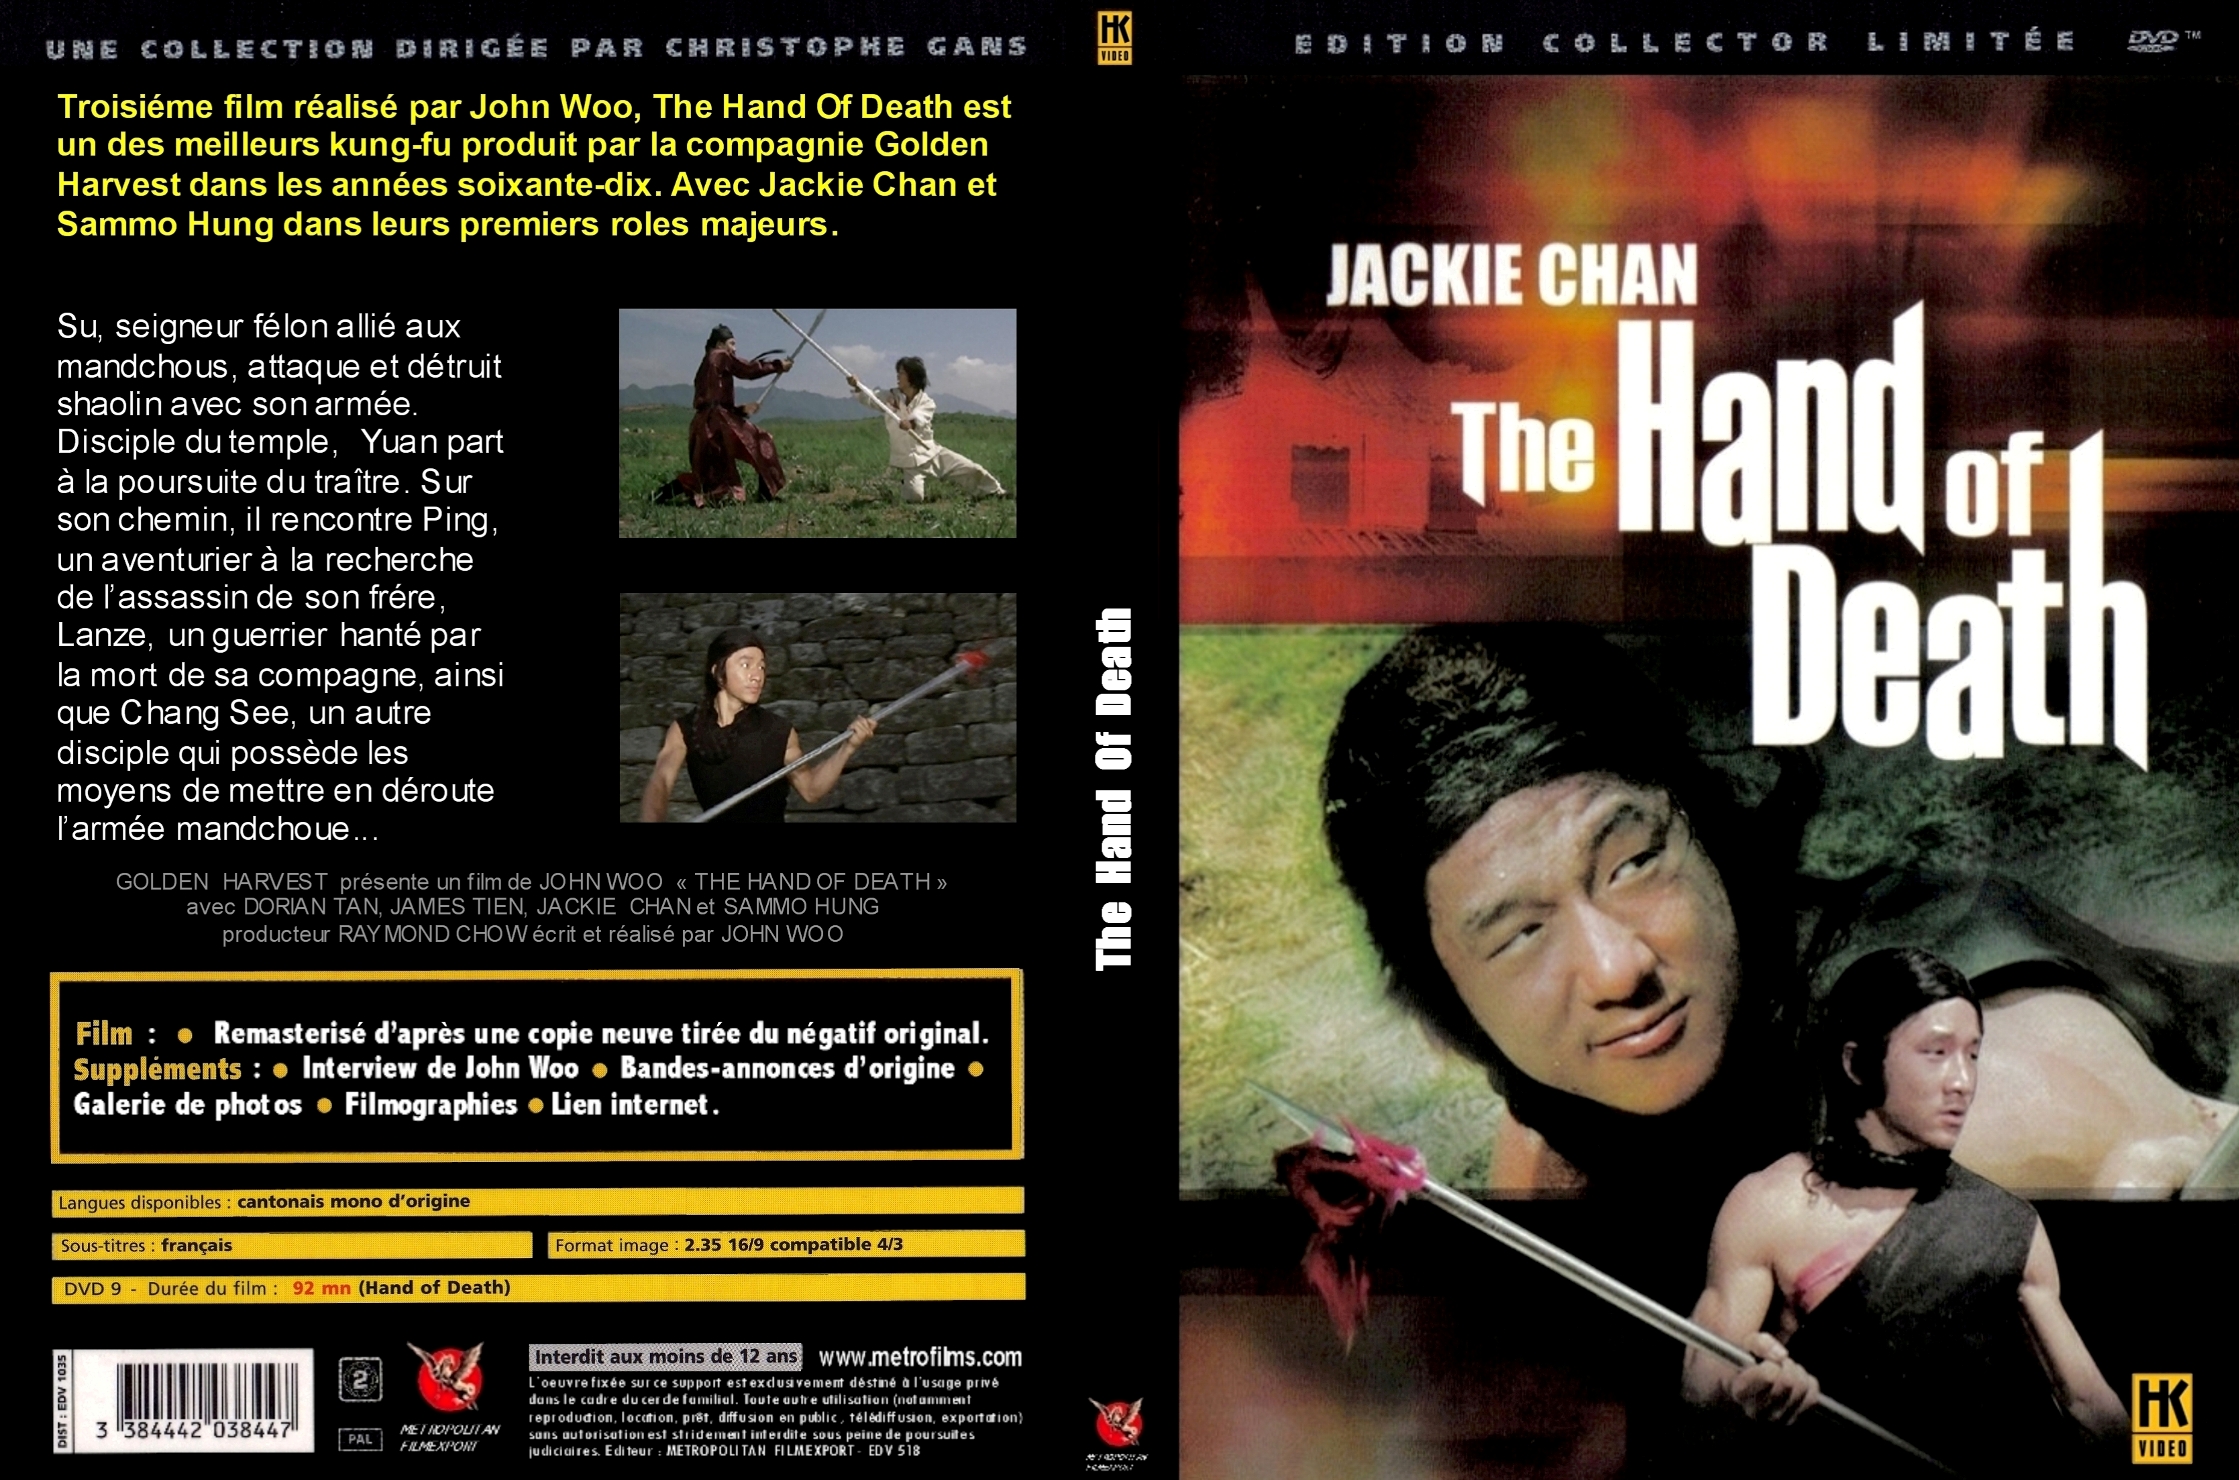 Jaquette DVD The hand of death custom